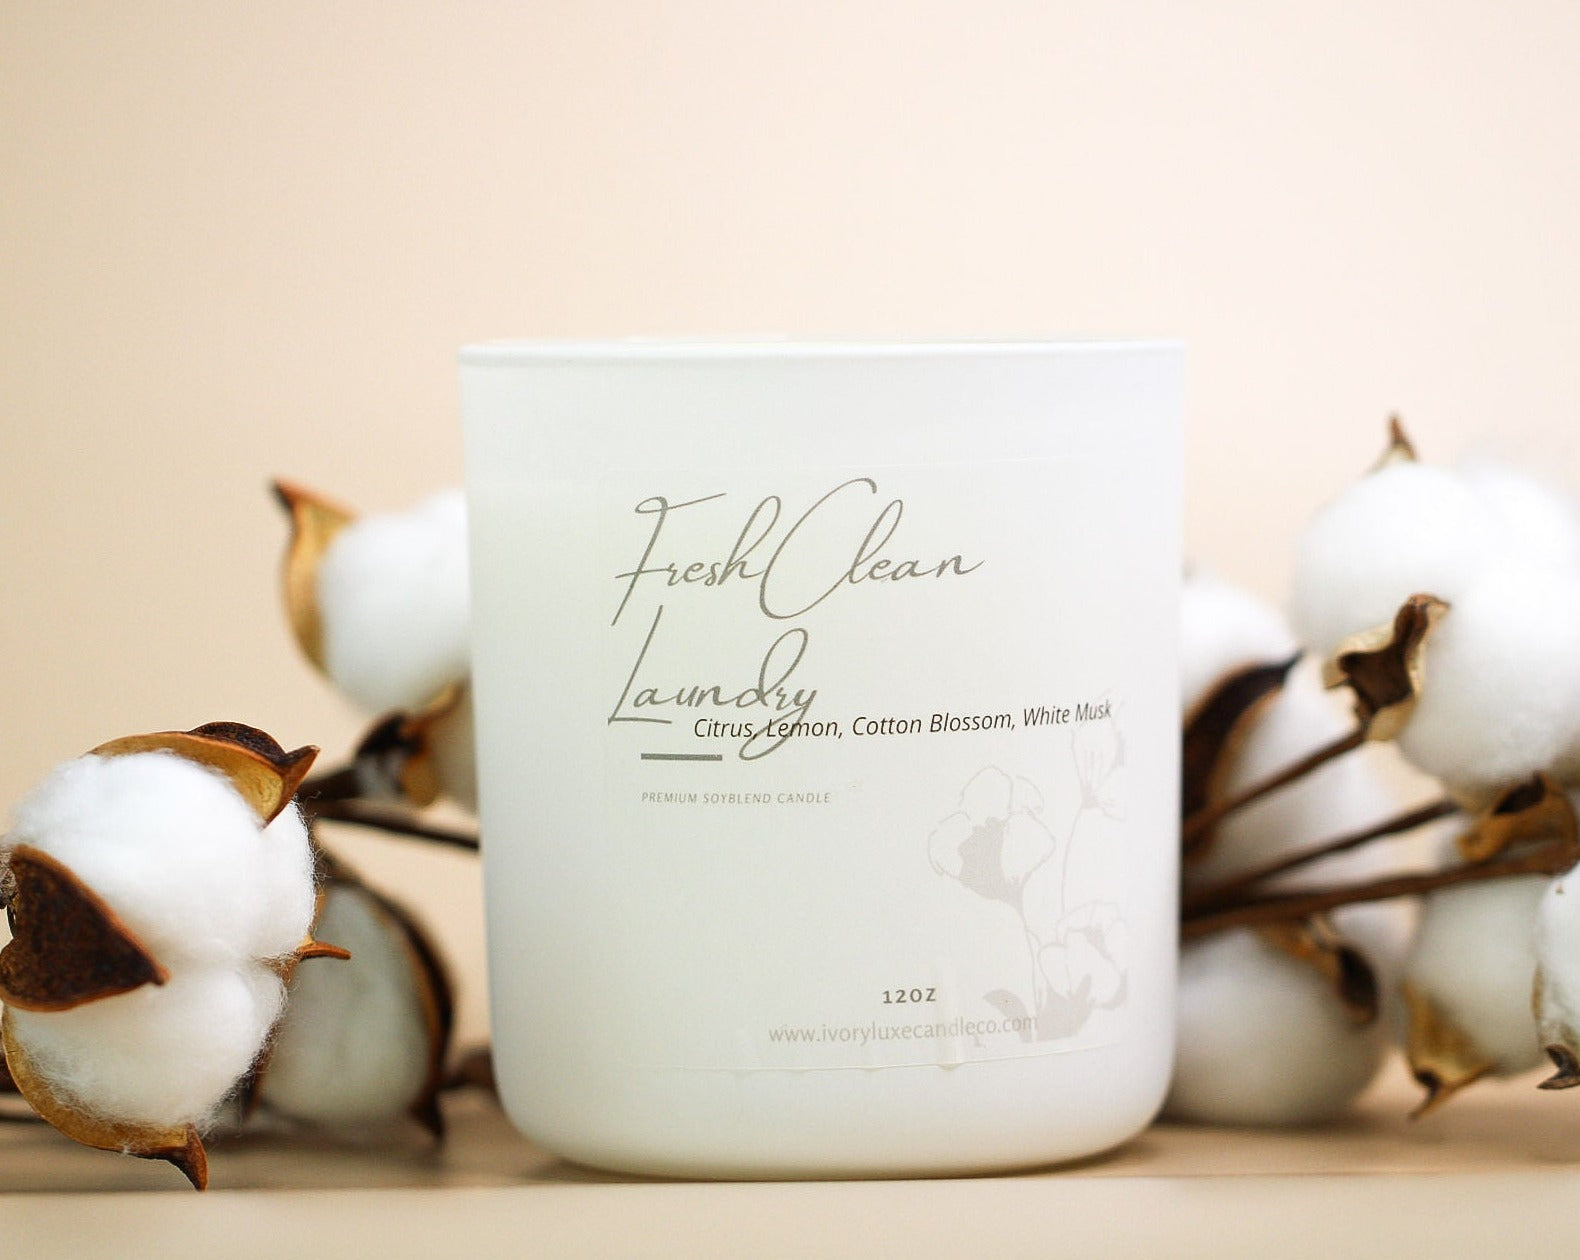 Fresh Clean Laundry | Premium Soy Blend Candle